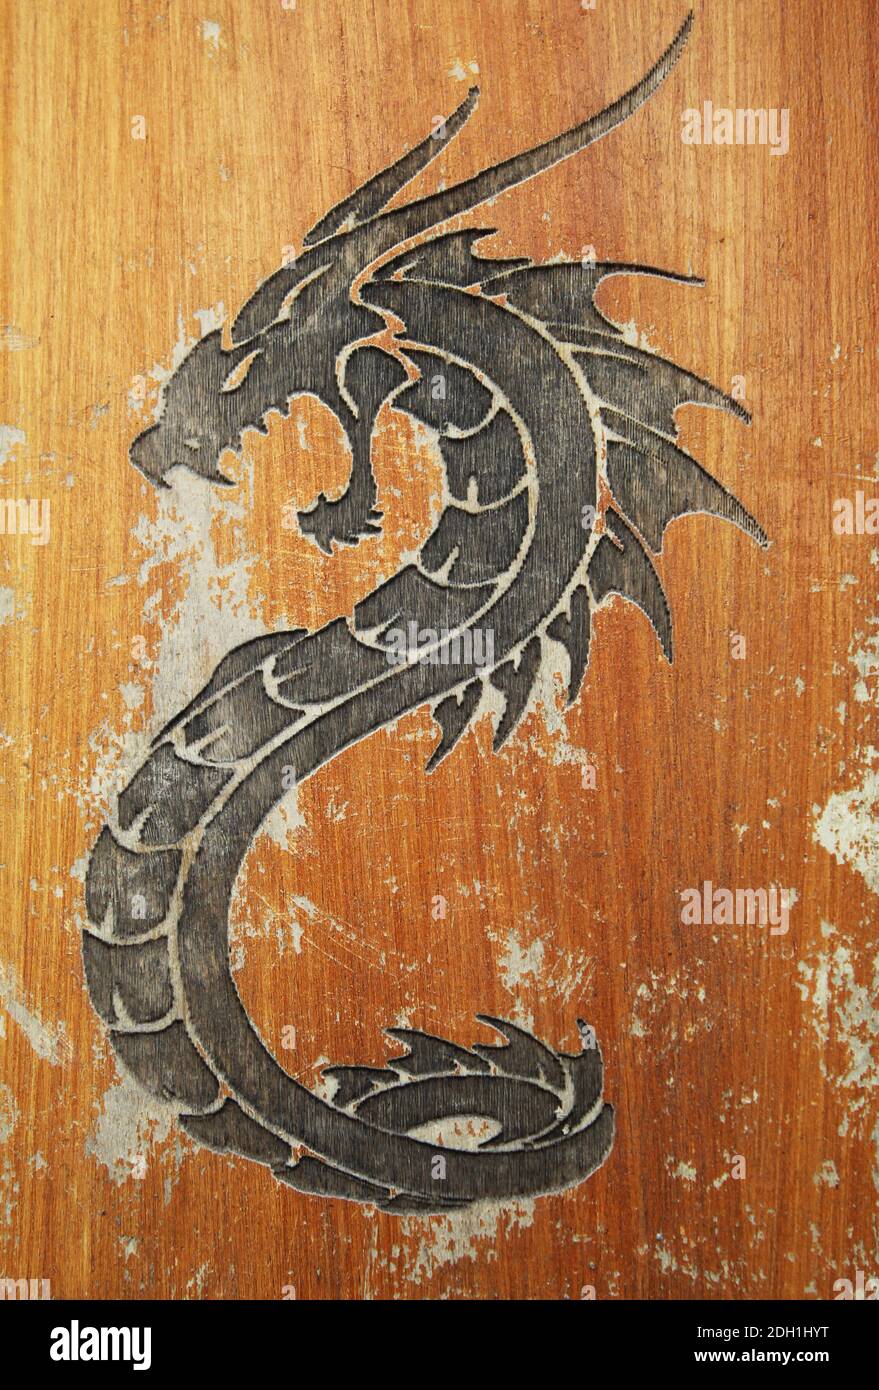 Dragon carved on a vintage wooden piece close-up Stock Photo